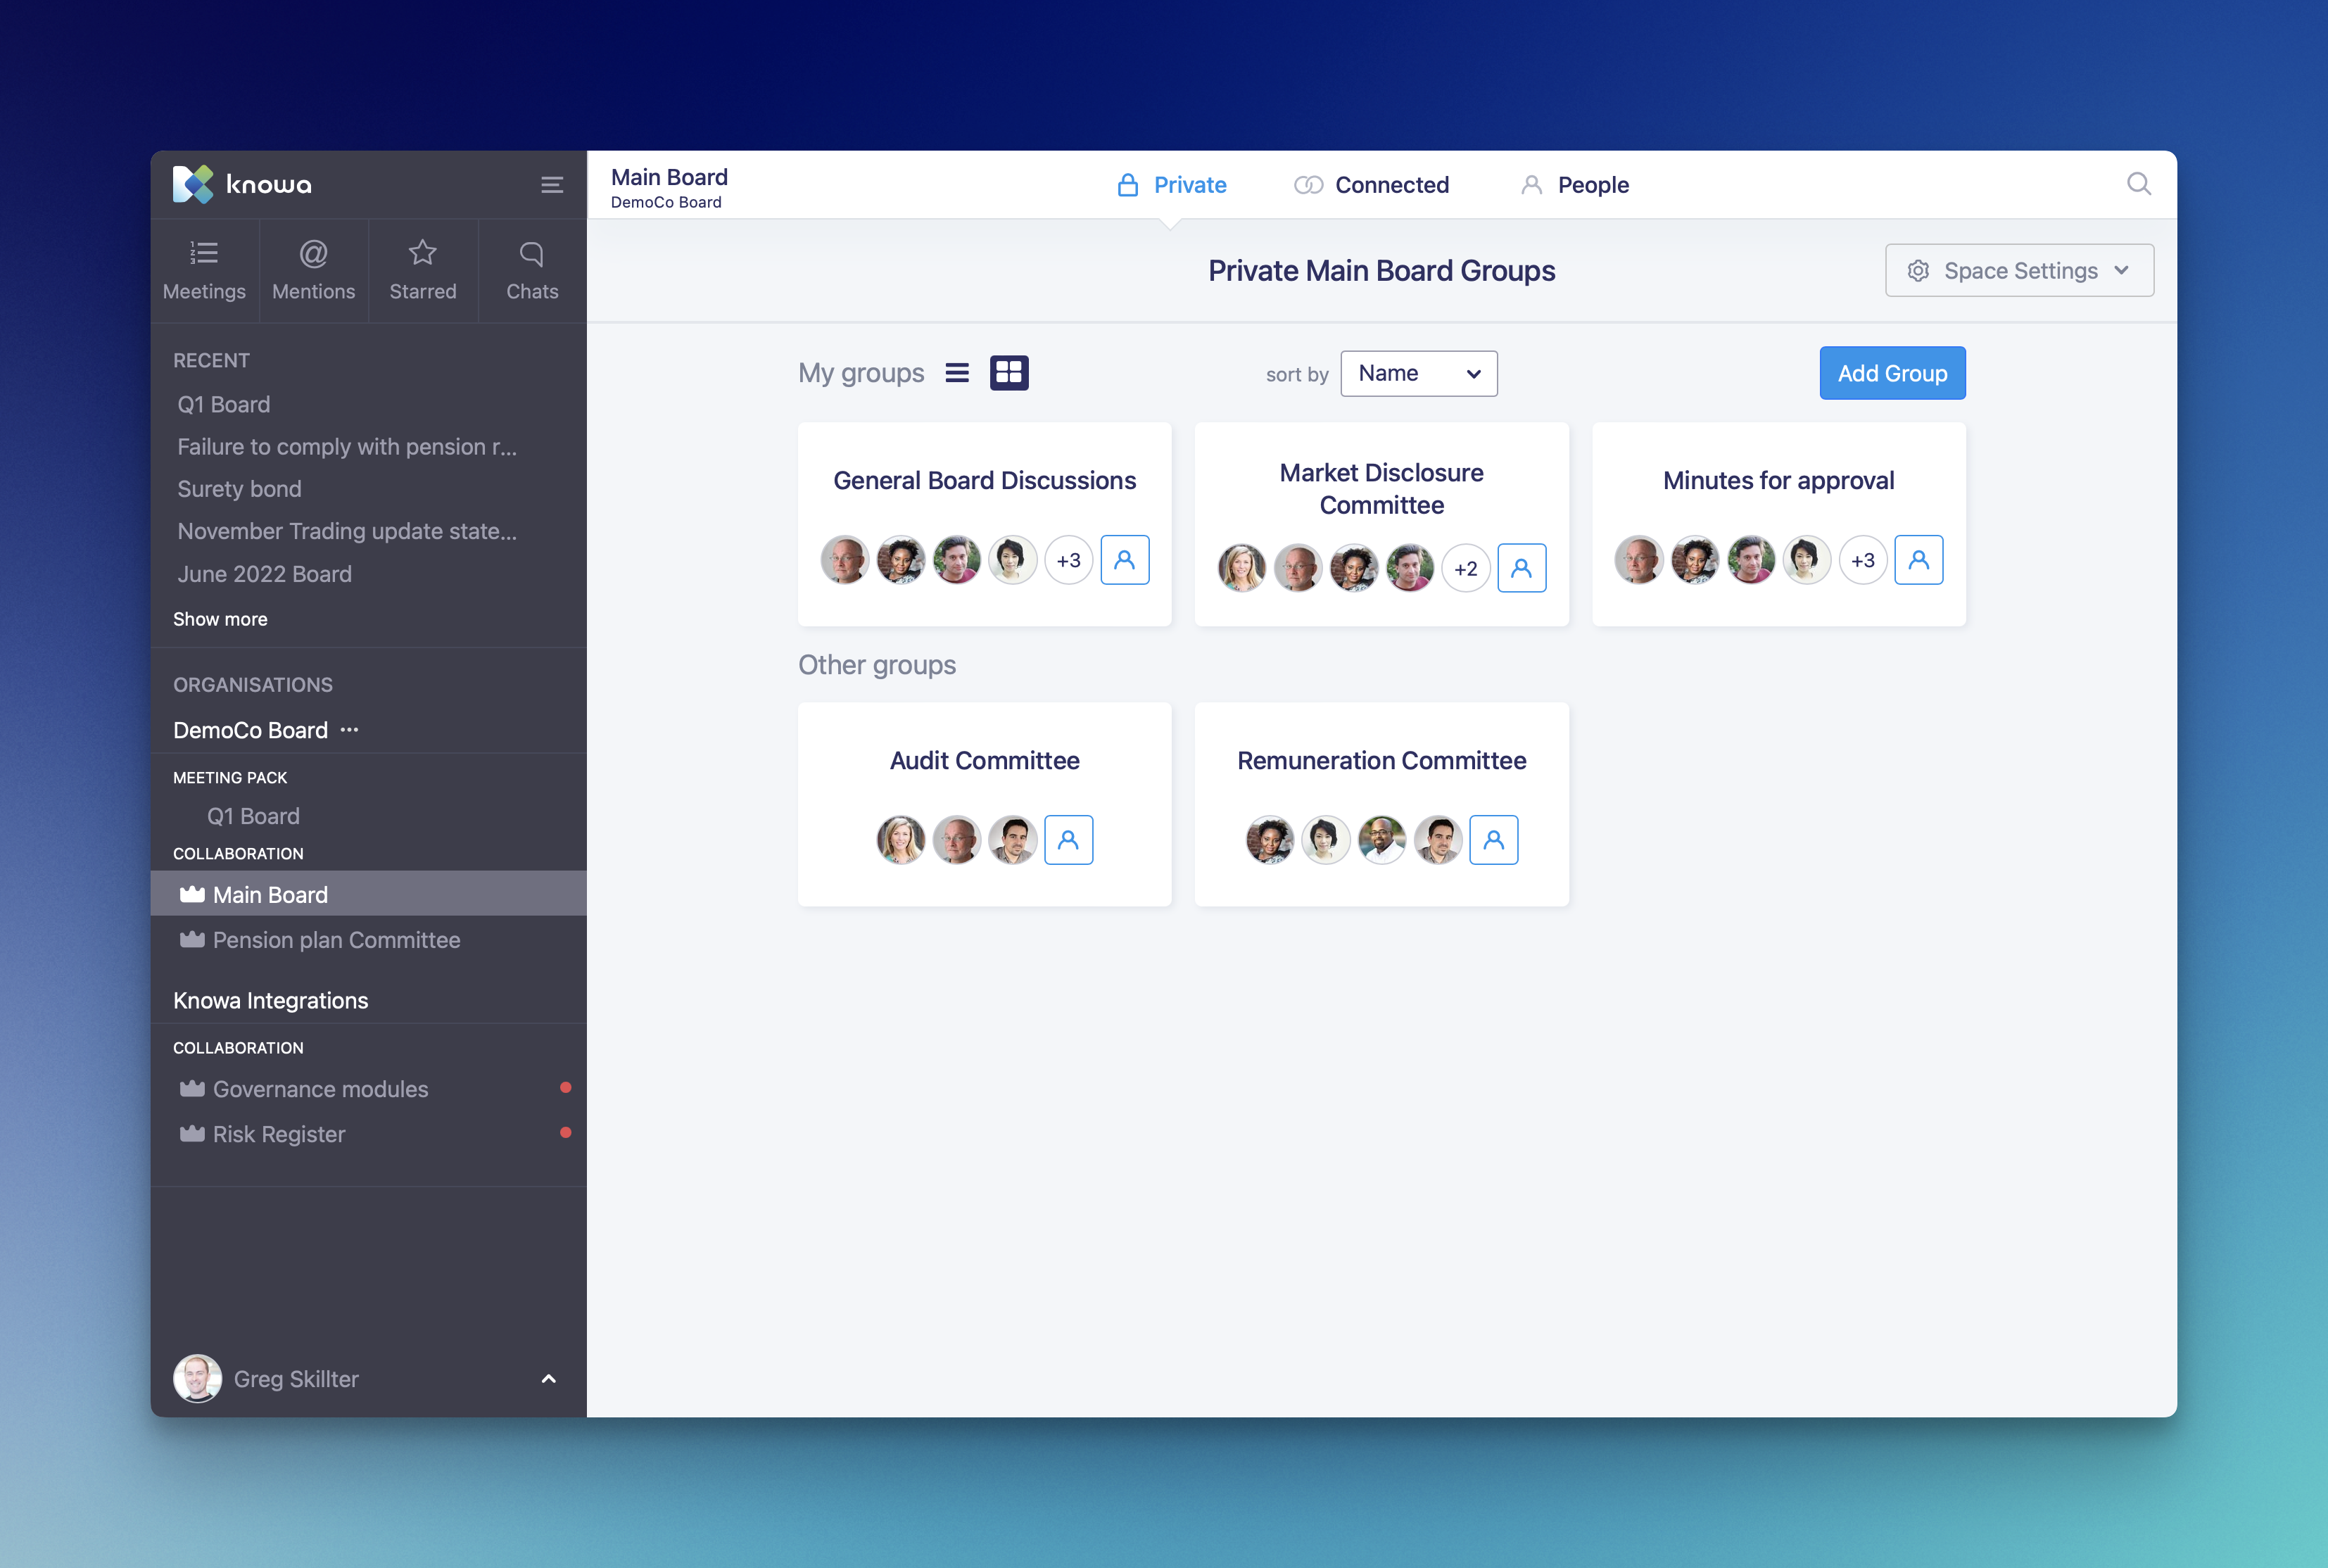 Collaboration Space: Knowa gives control to Admins to tailor their Knowa layout to mirror the board's governance structure, including its sub-committees, working groups and project teams.